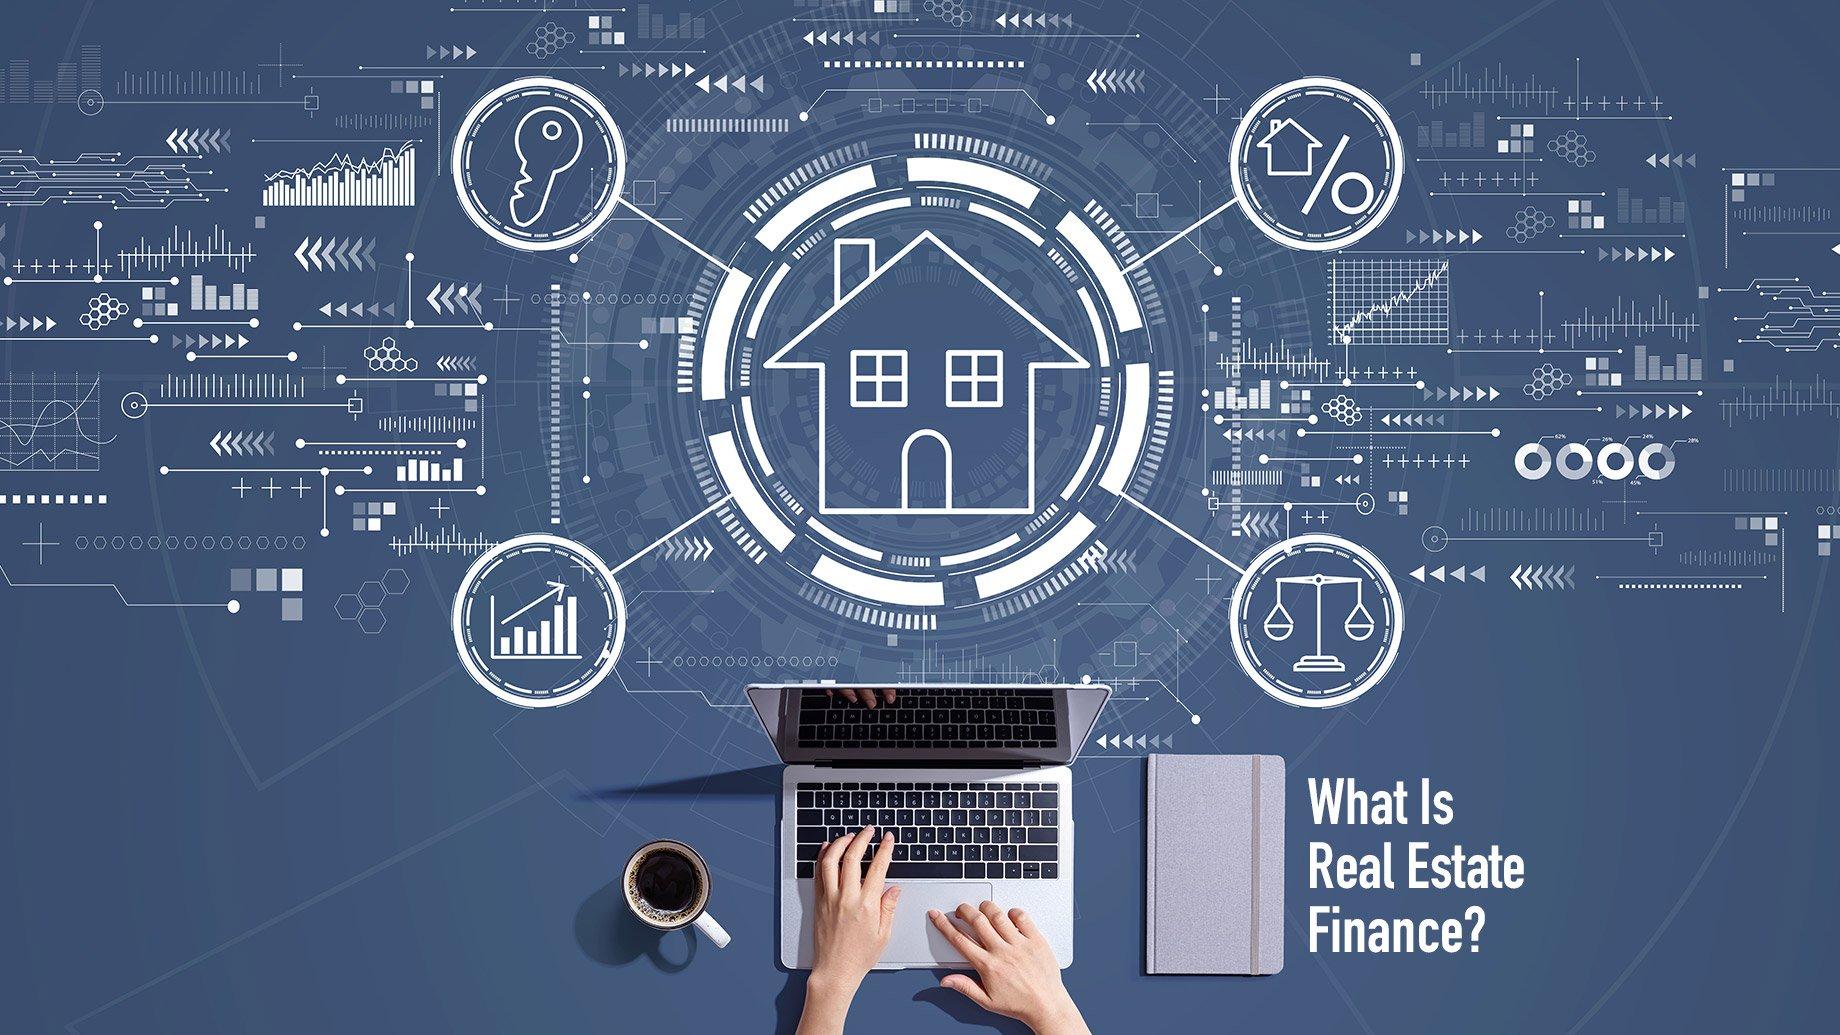 Why real estate finance